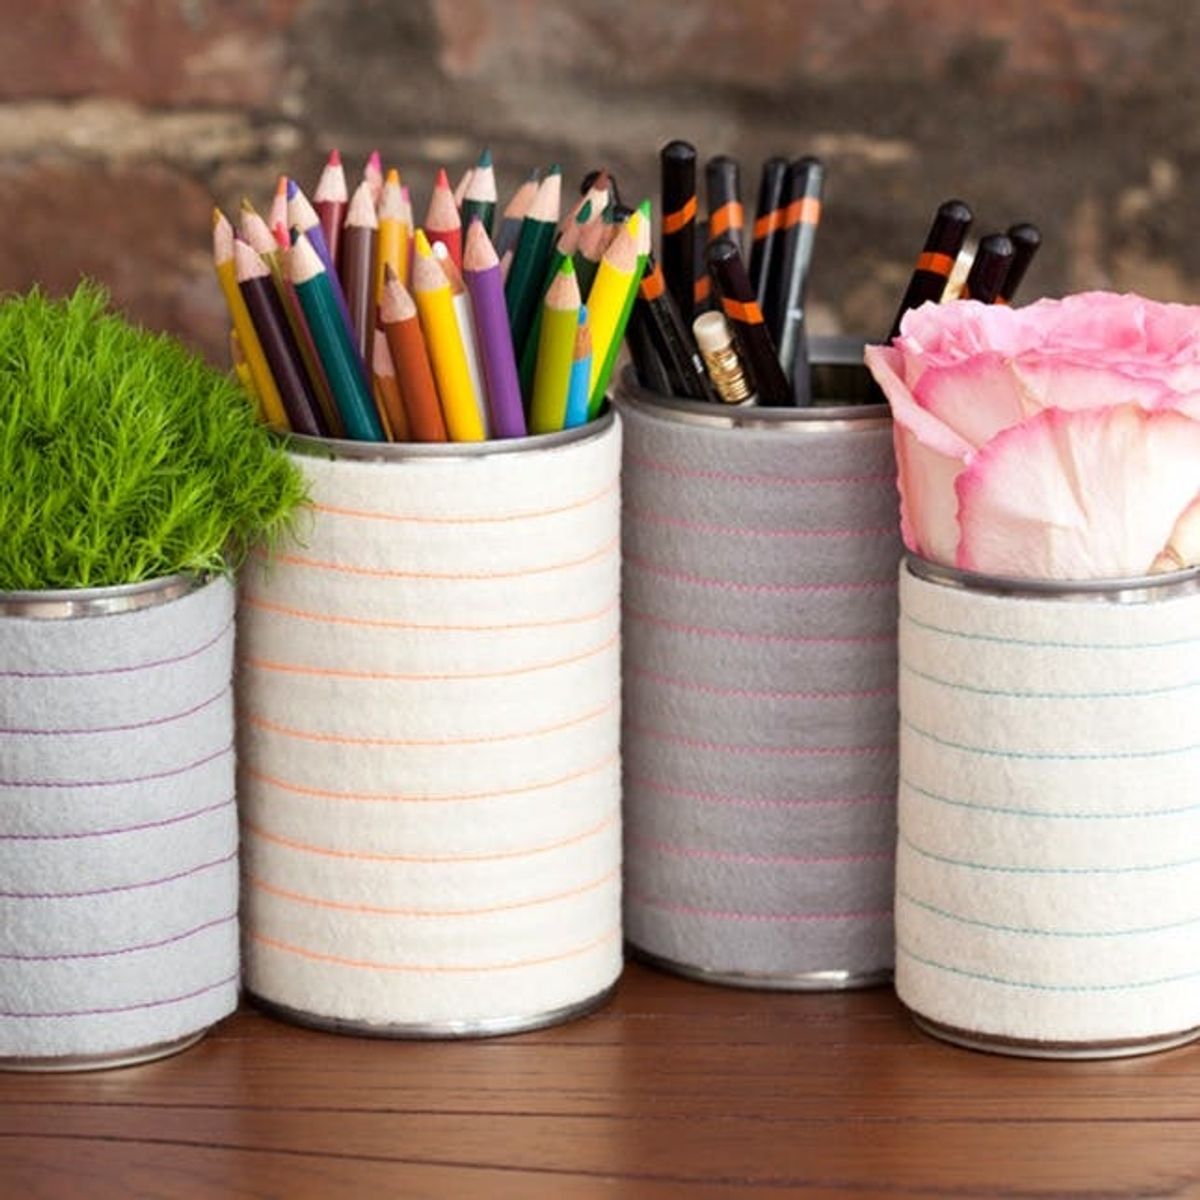 How to Make Striped Wool Pencil Pots and Planters